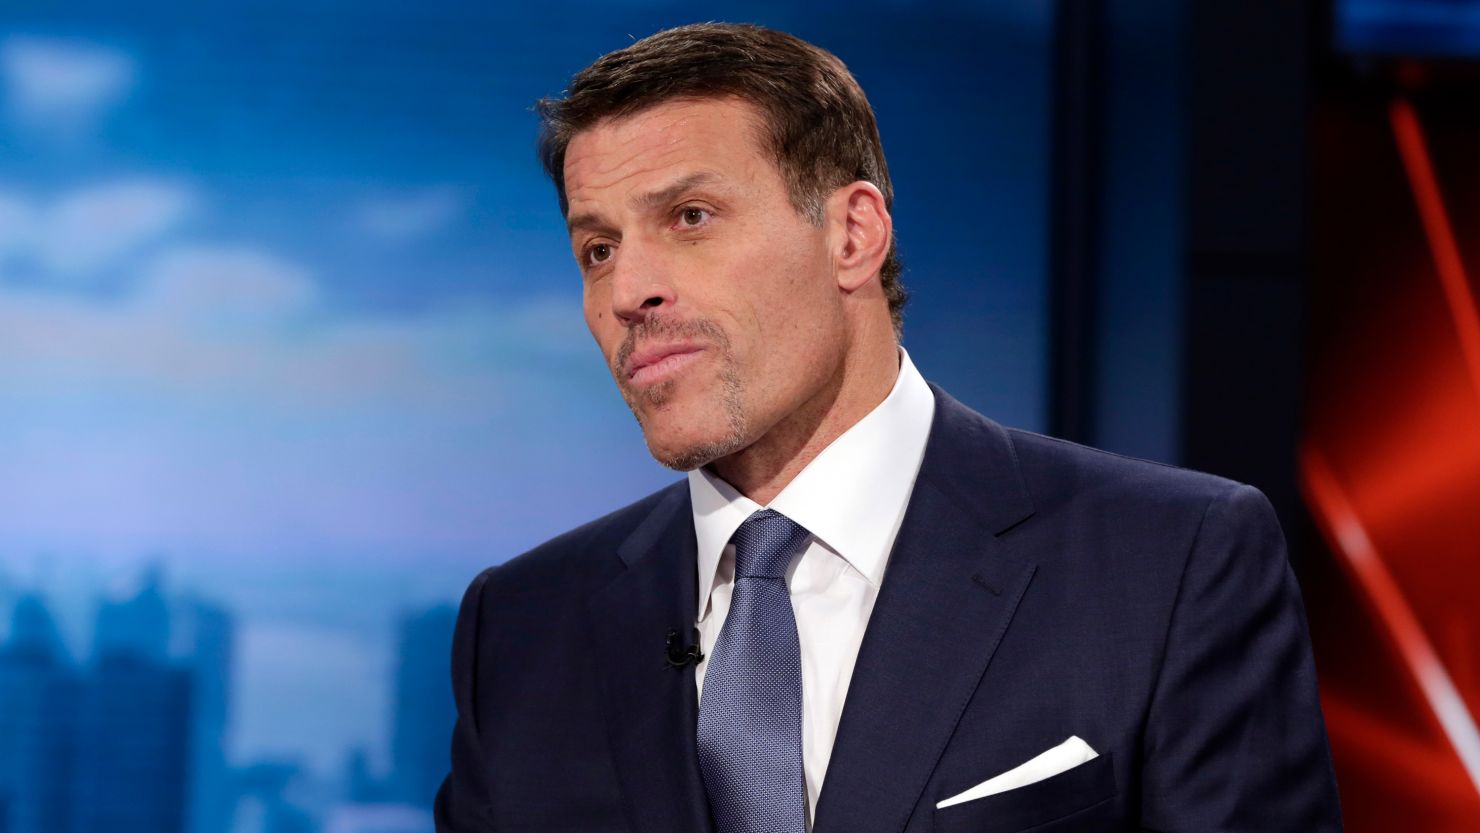 Tony Robbins, motivational speaker, personal finance instructor and self-help author, is interviewed during the taping of "Wall Street Week," on the Fox Business Network in New York Thursday, March 17, 2016.